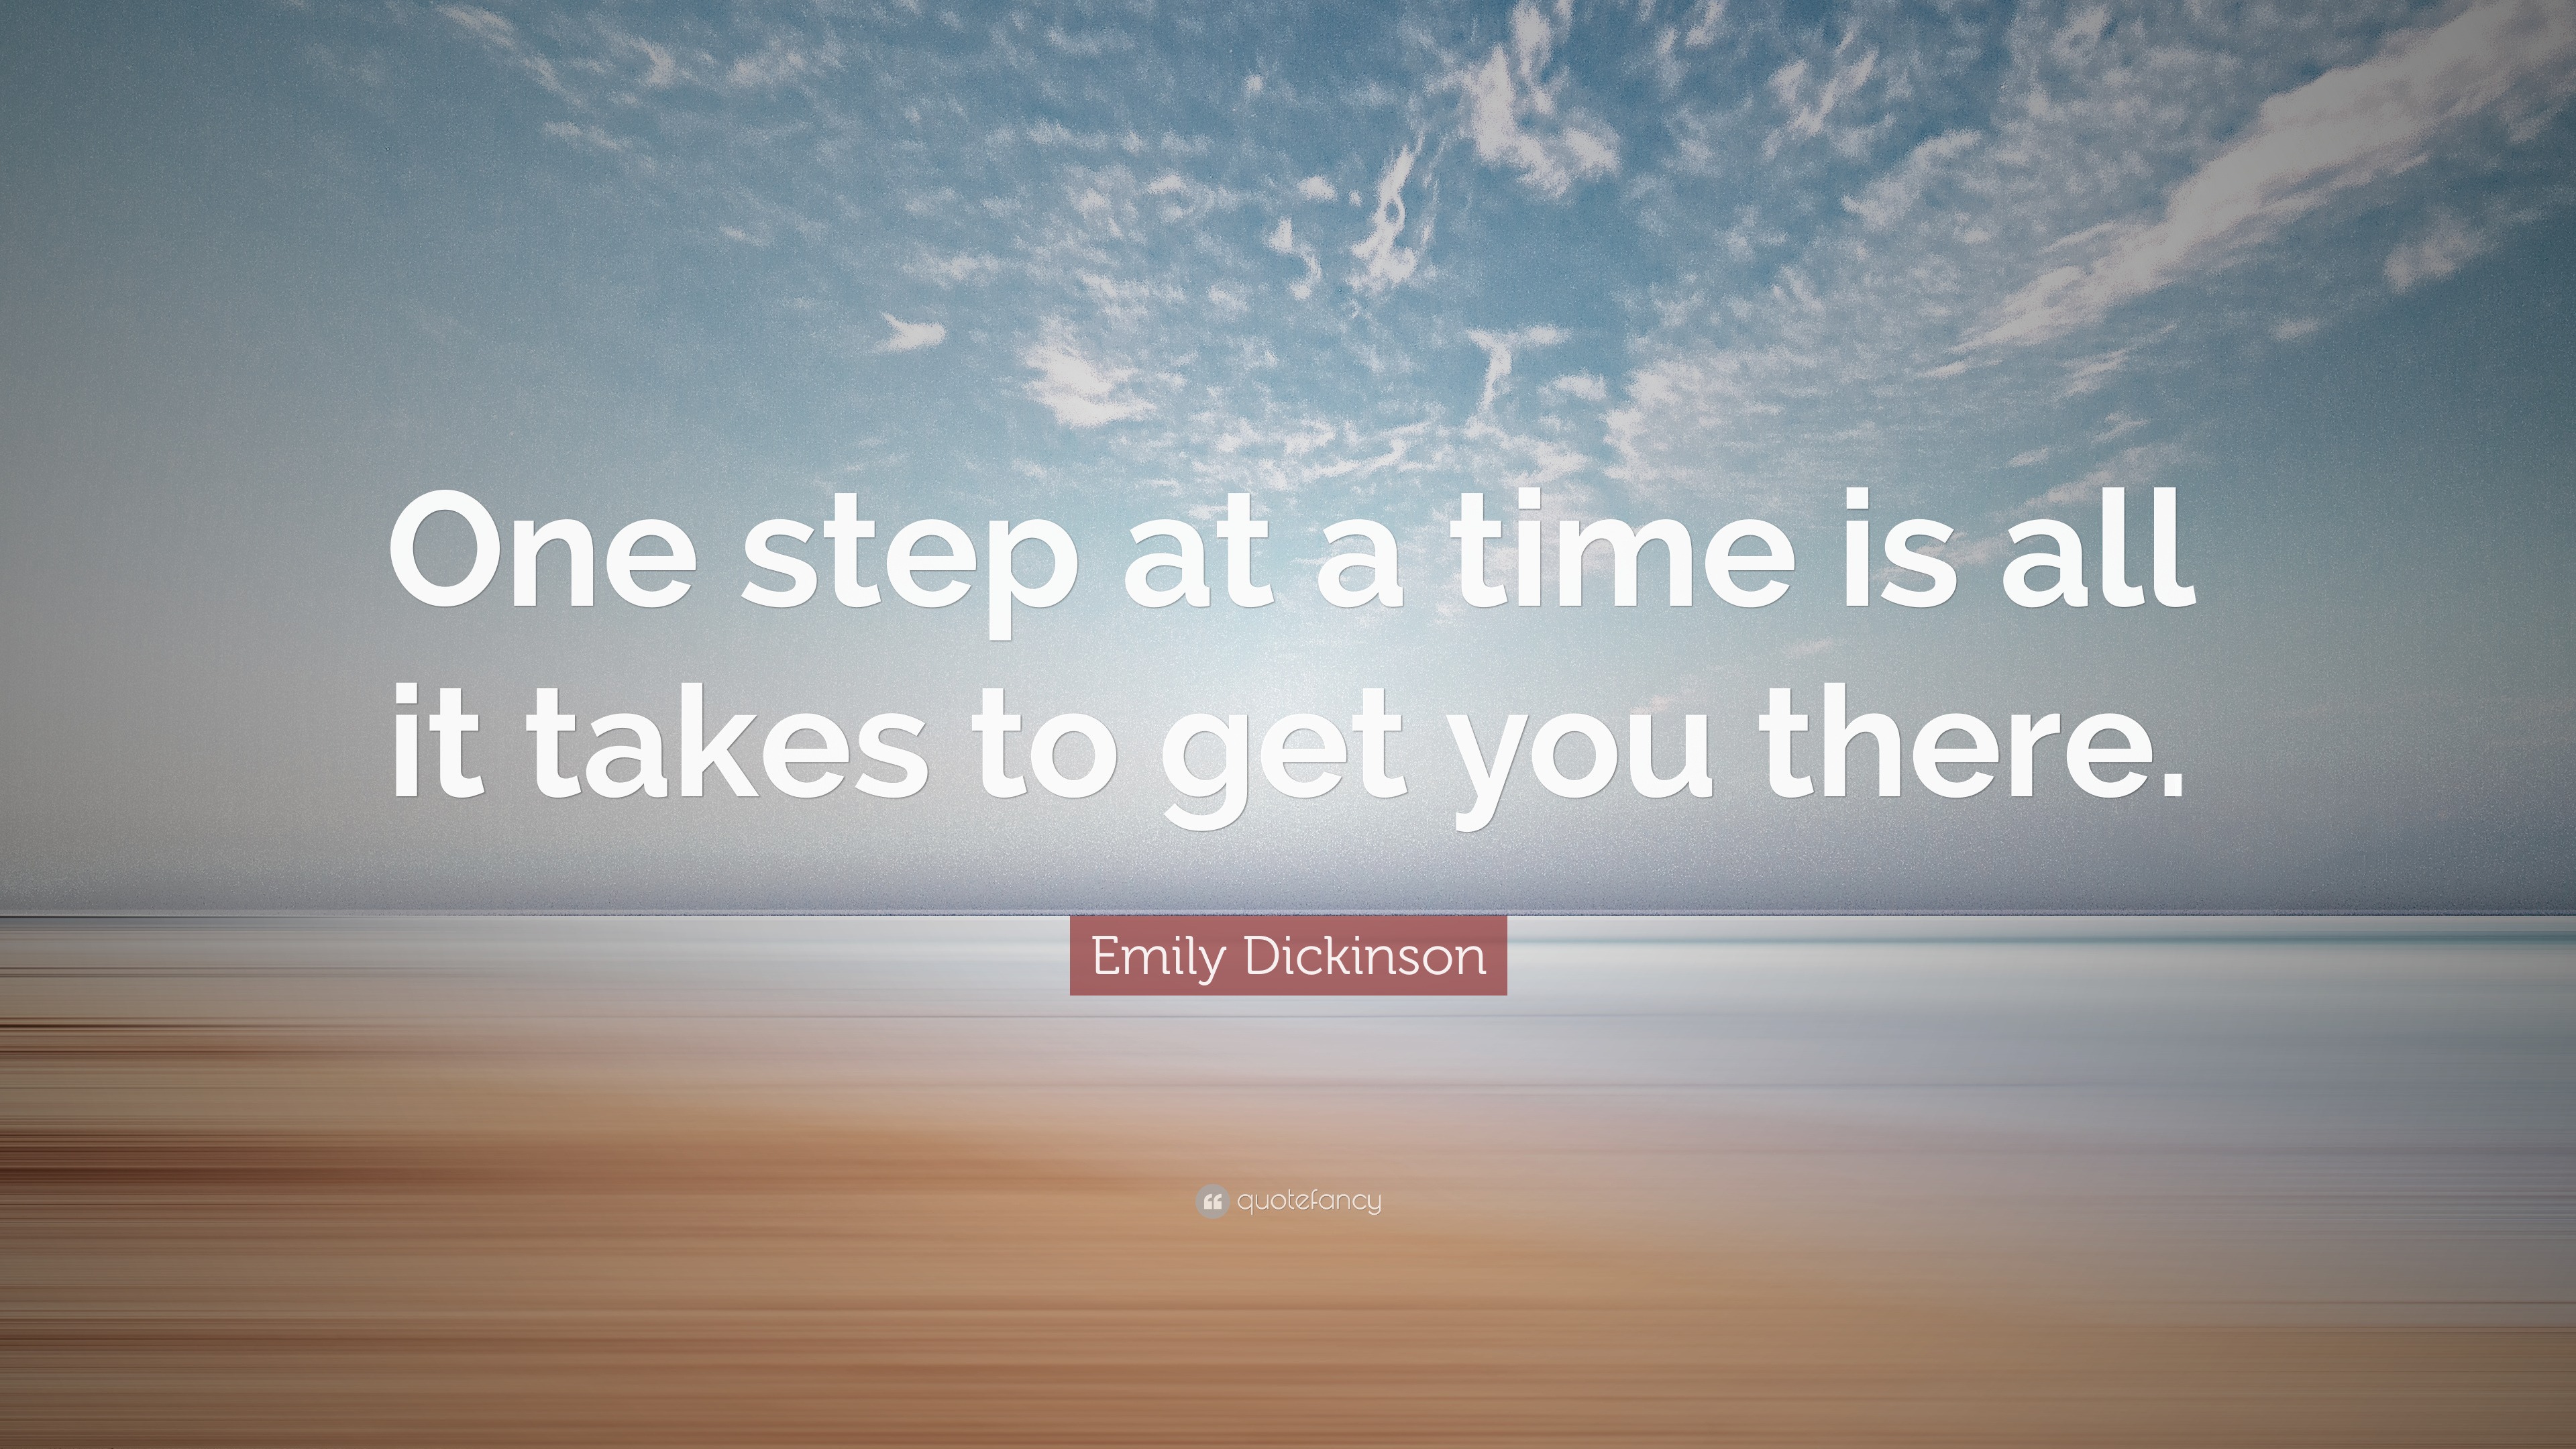 Emily Dickinson Quote: “One step at a time is all it takes to get you  there.”